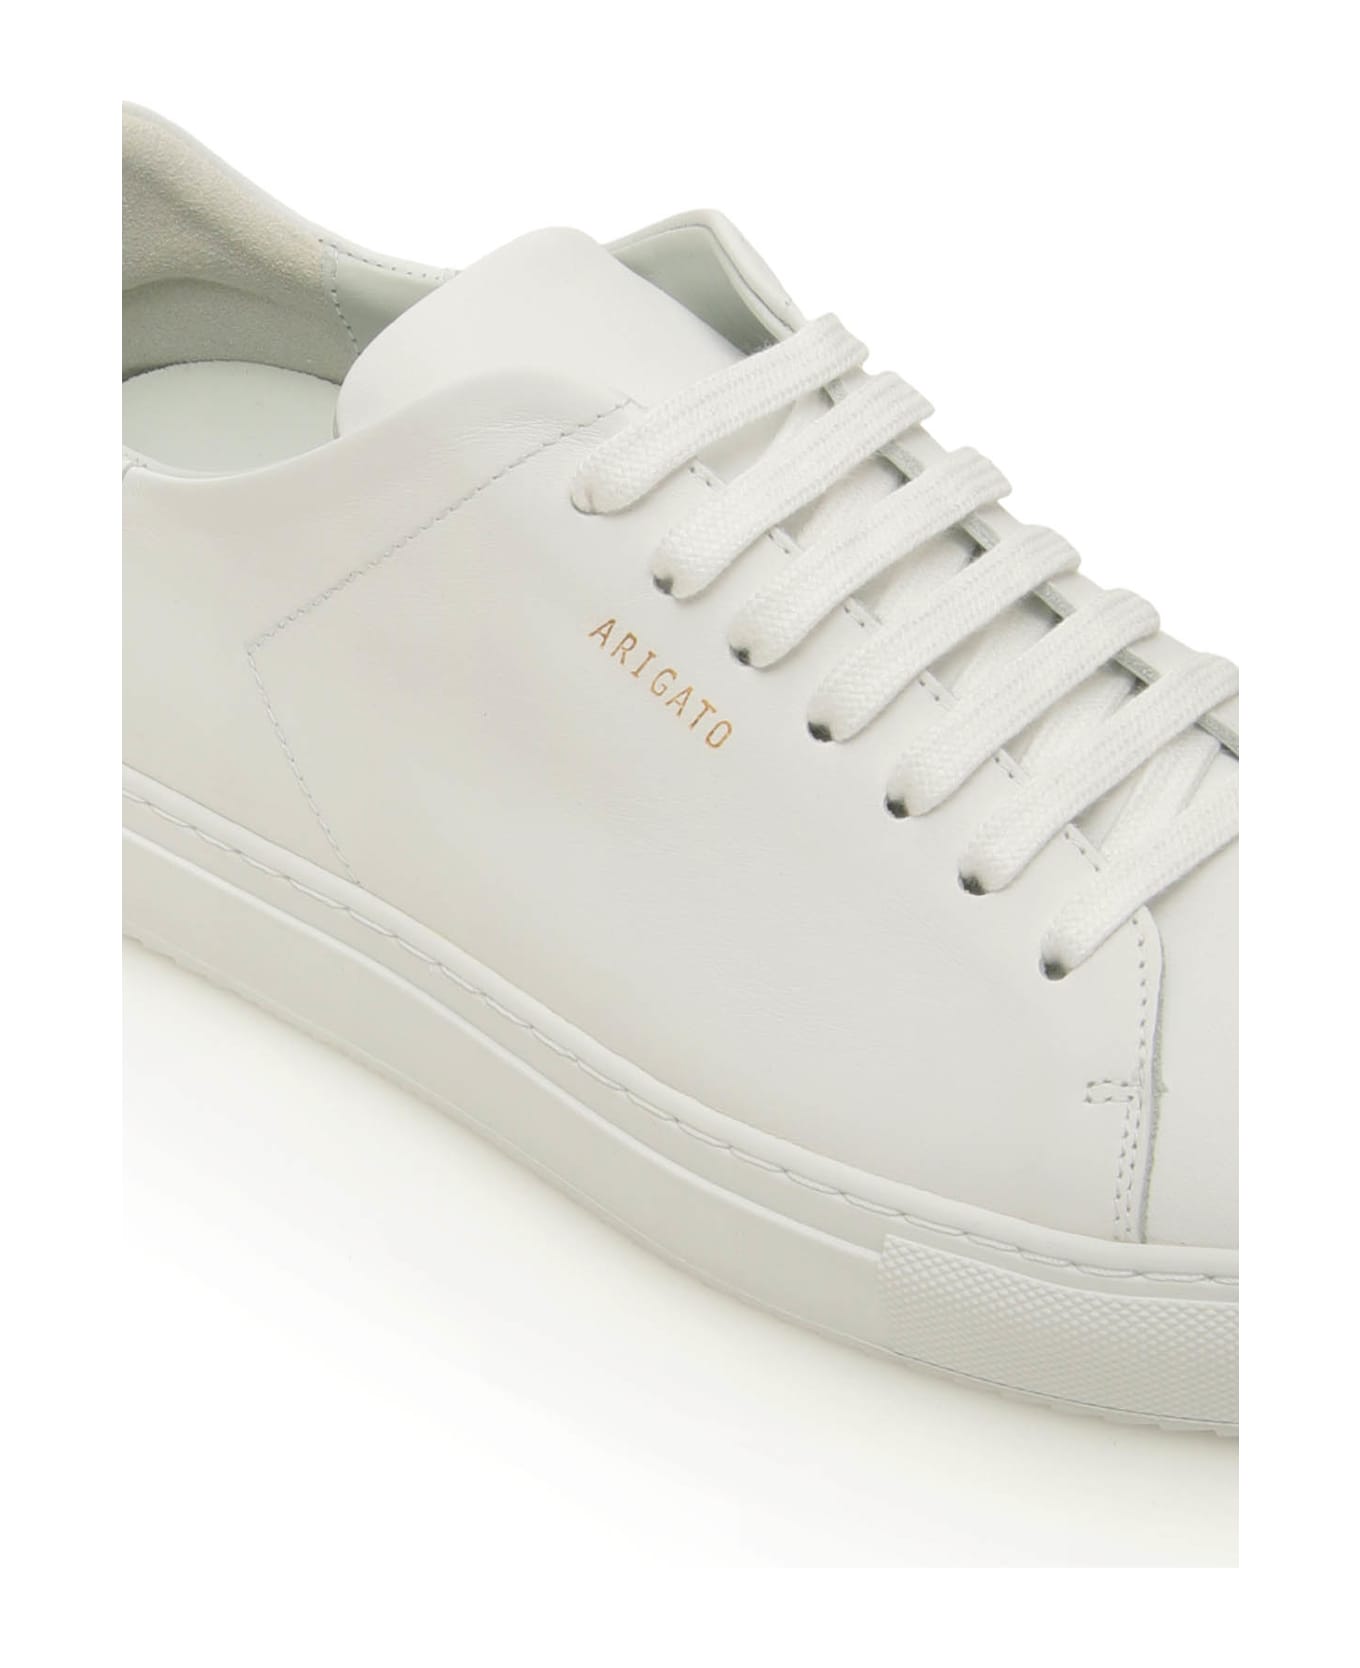 Axel Arigato Clean 90 Leather Sneakers - White スニーカー